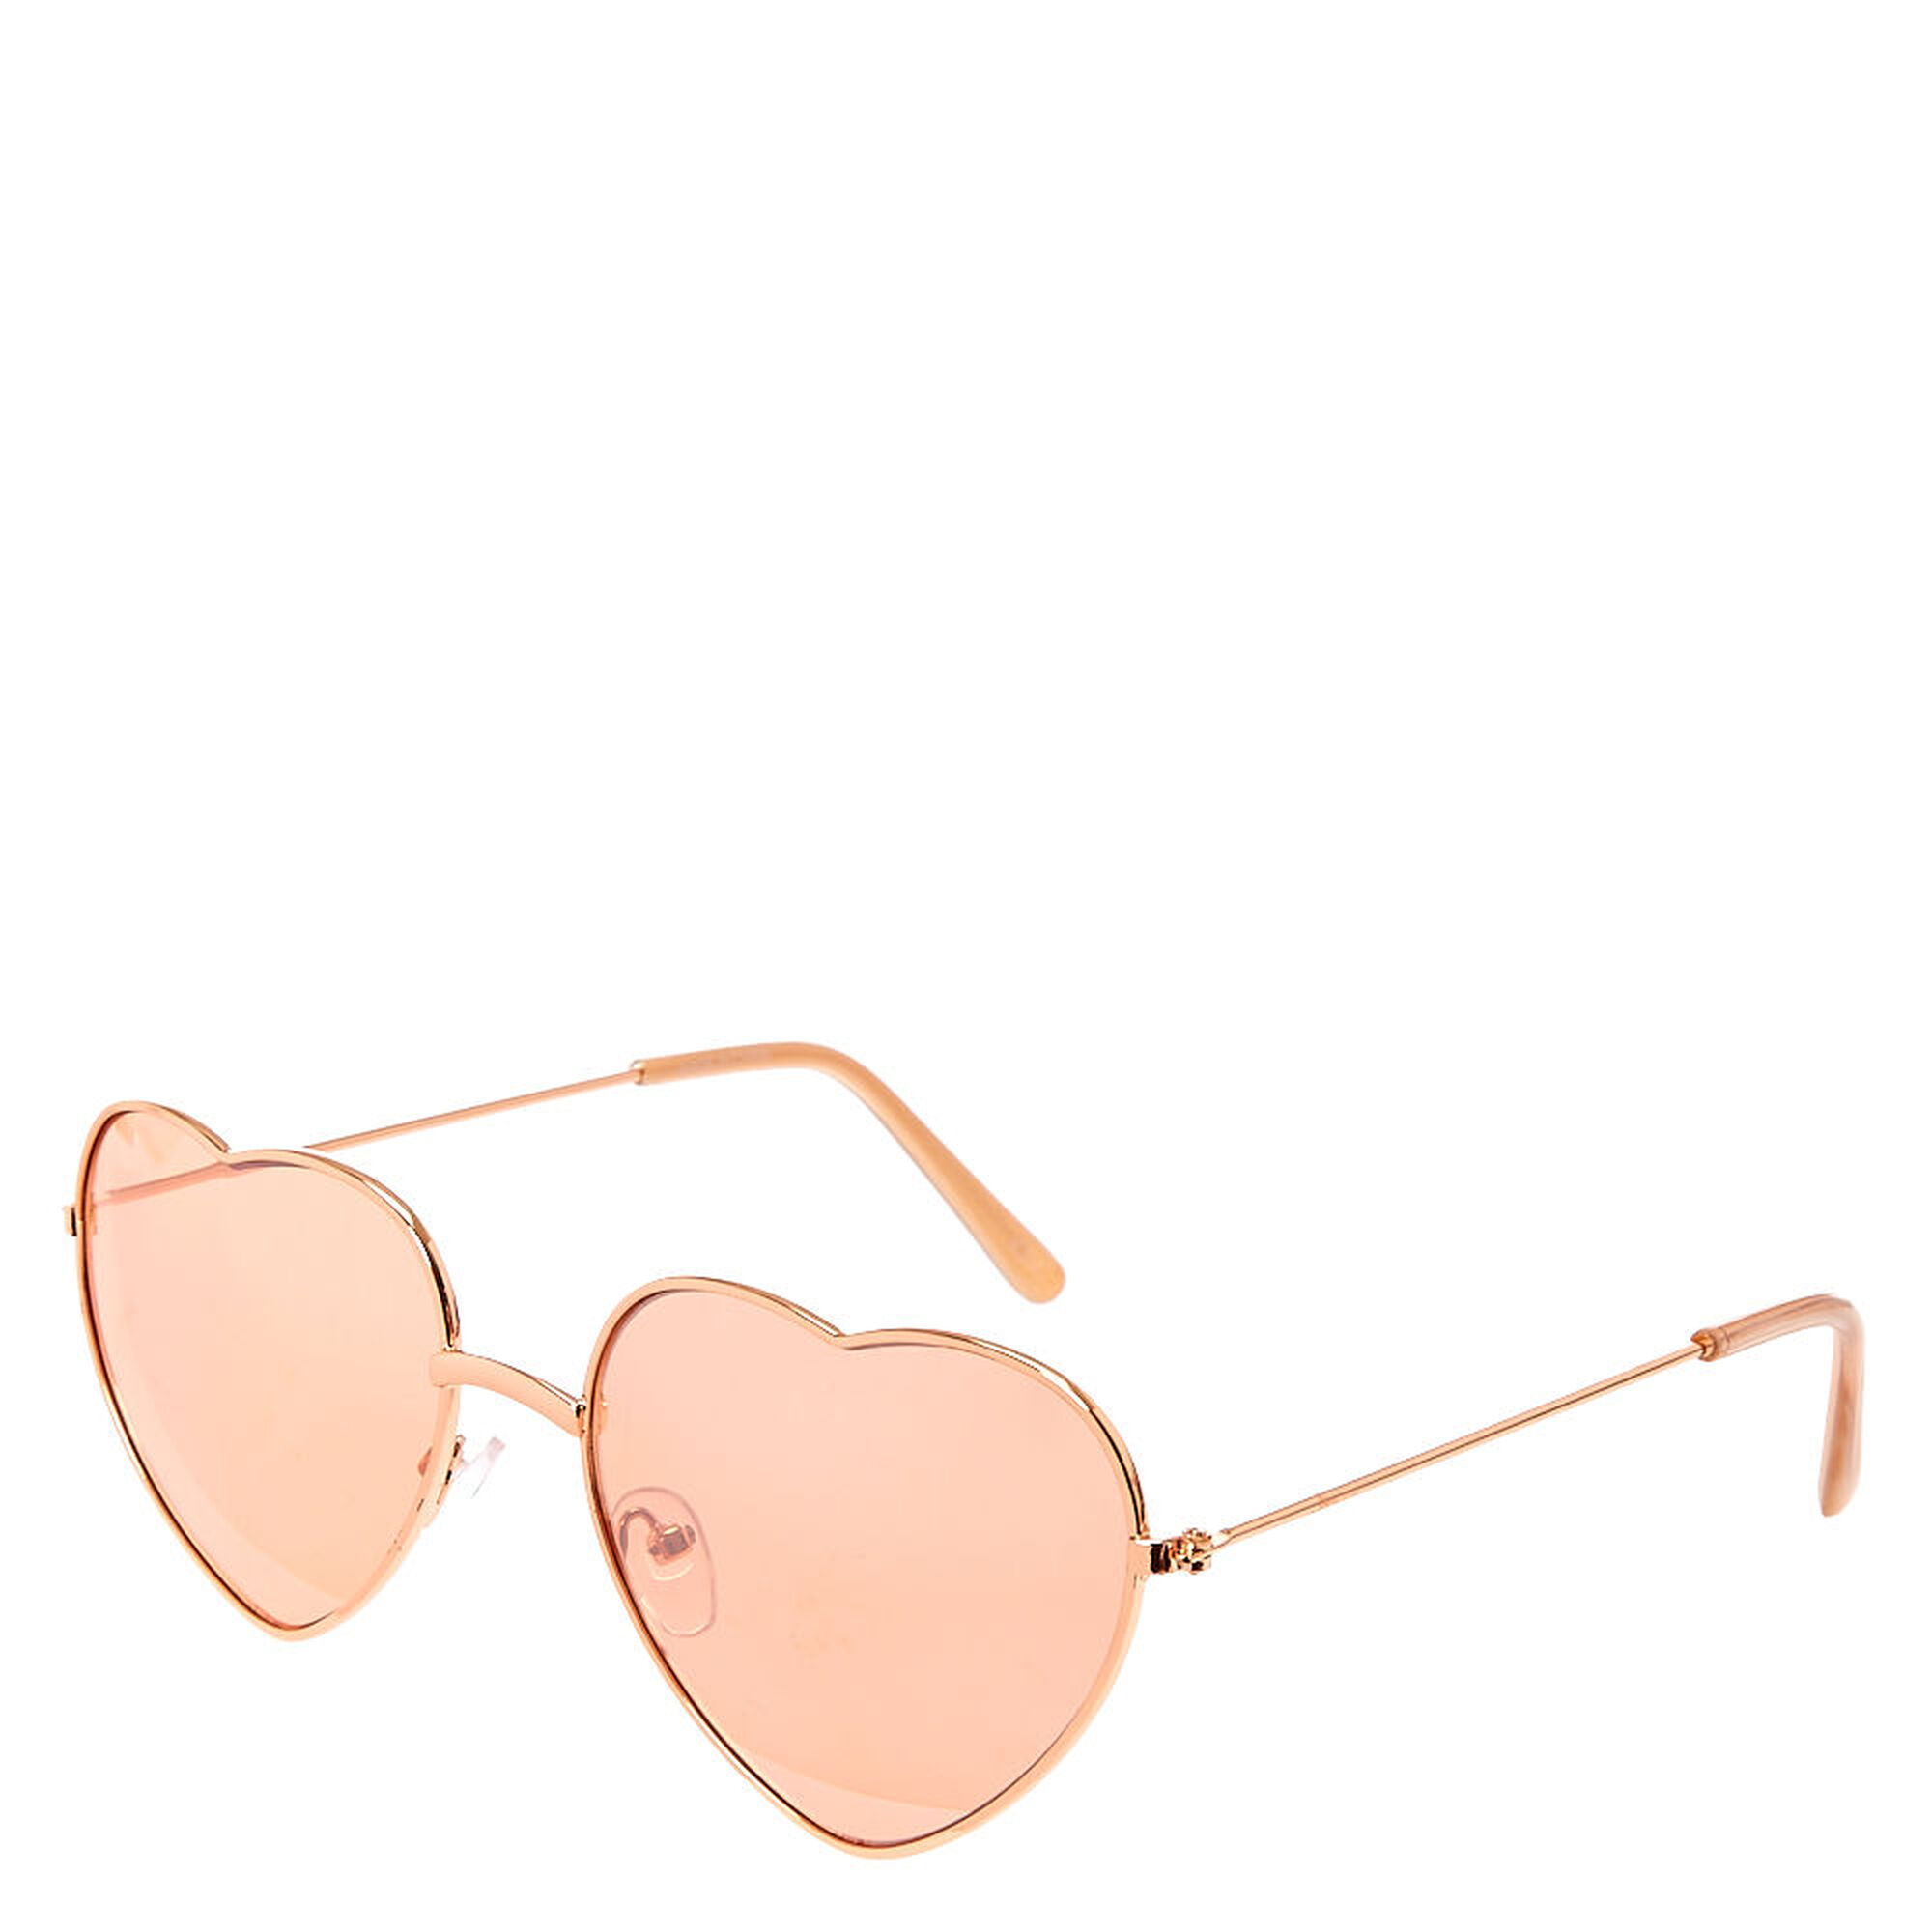 View Claires Heart Sunglasses Rose Gold information